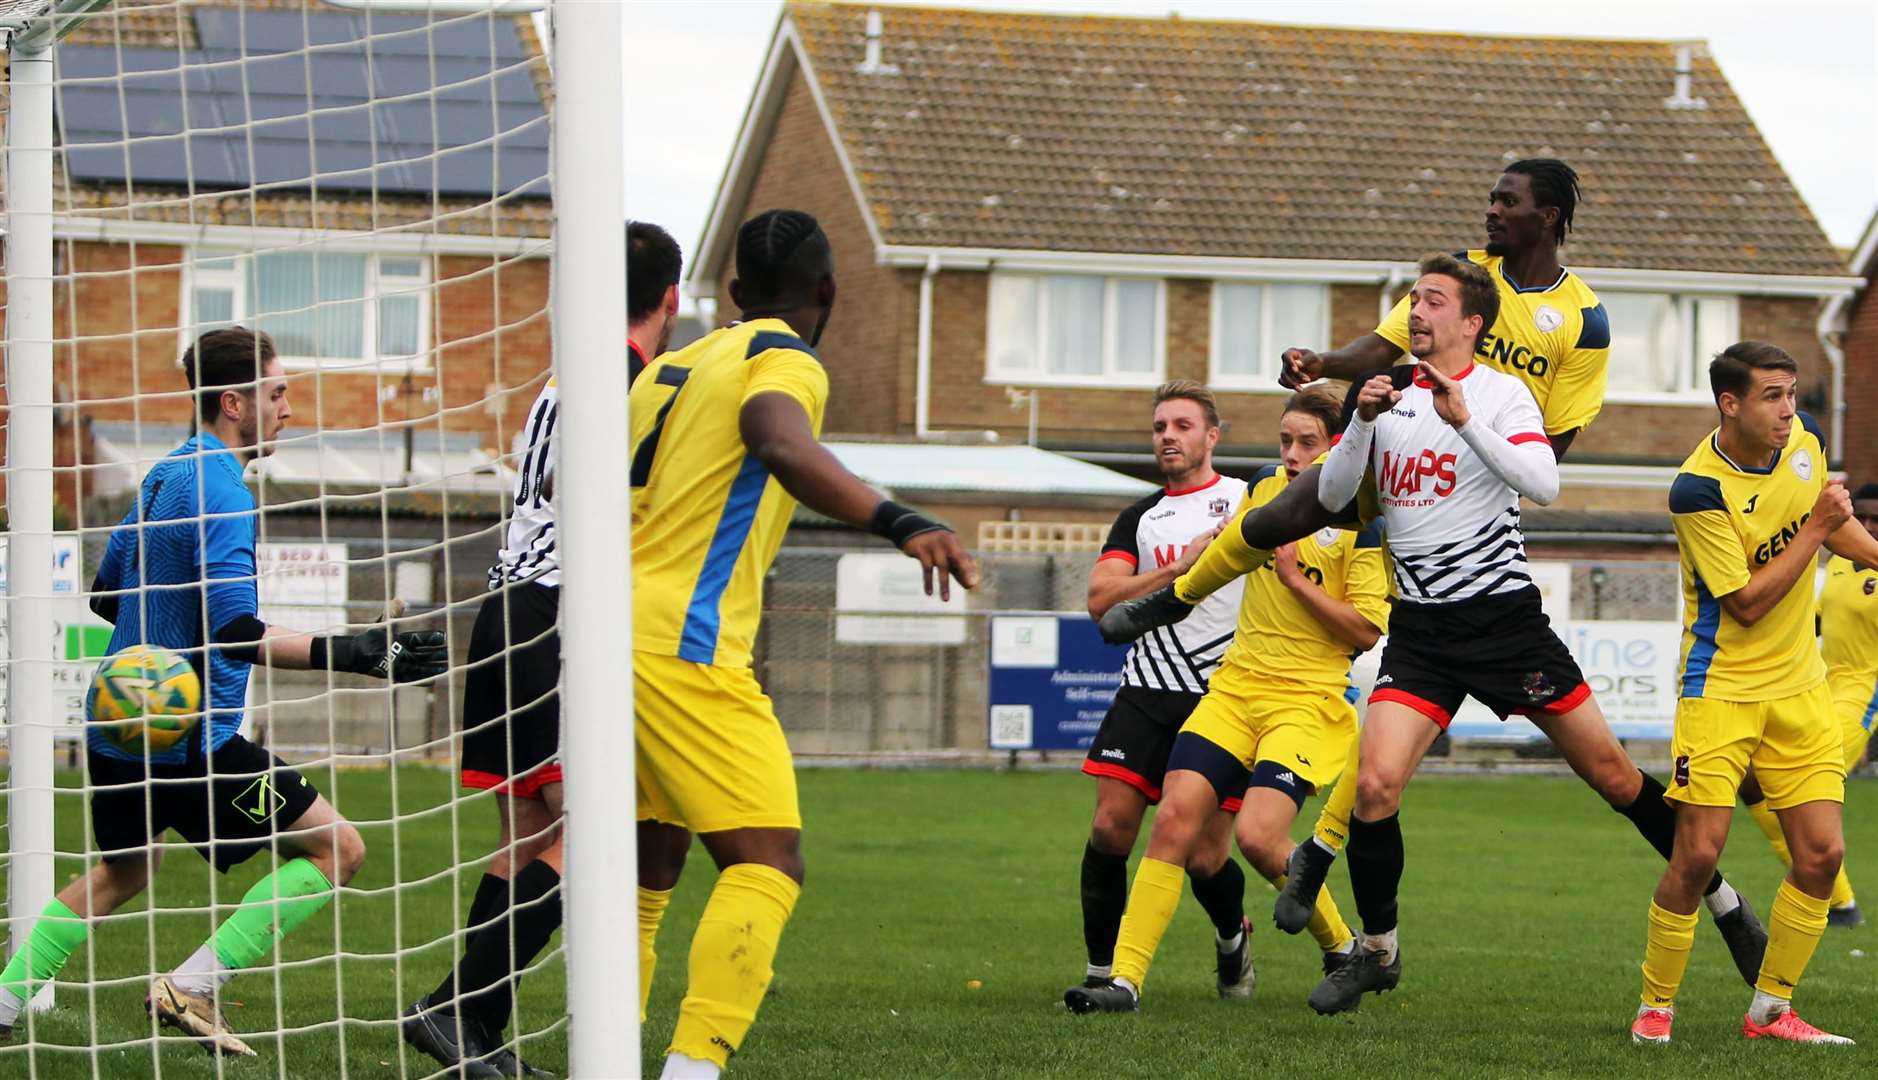 Billy Munday heads home Deal Town's second in their 5-1 Kent Senior Trophy win over K Sports. Picture: Paul Willmott